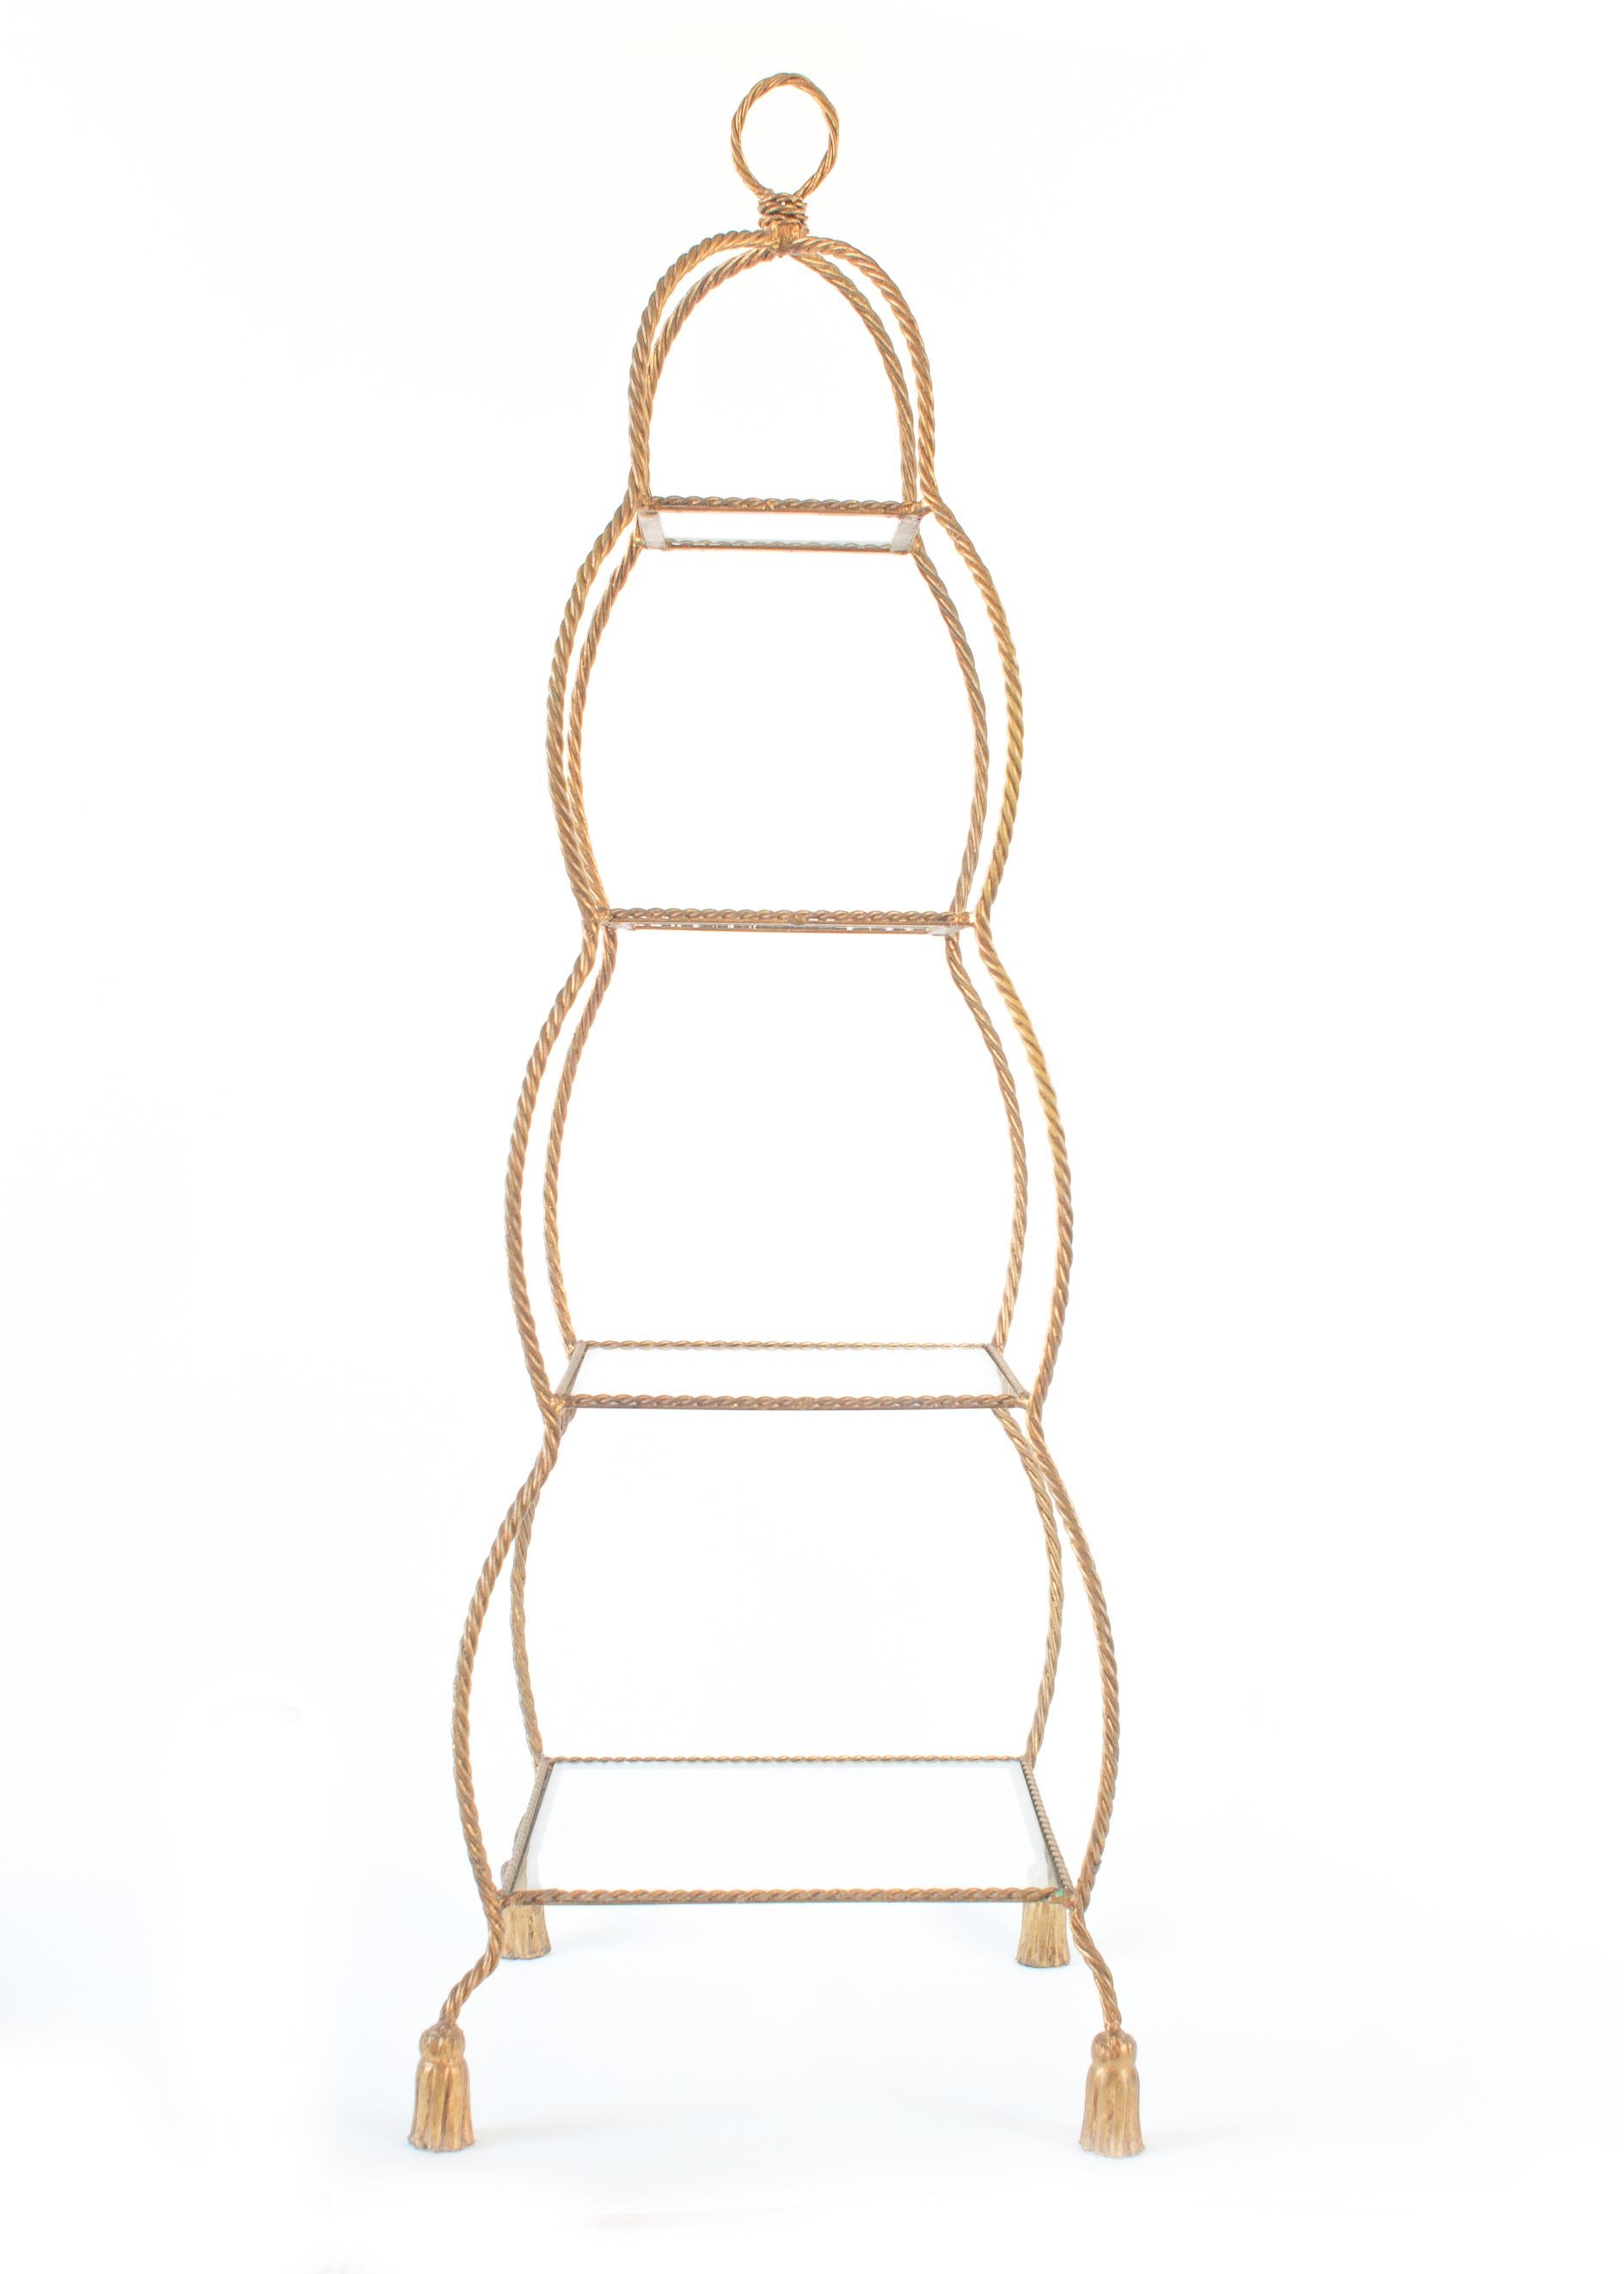 Étagère comprised of four square glass shelves framed within a gilt metal rope and tassel, billowing-form design.